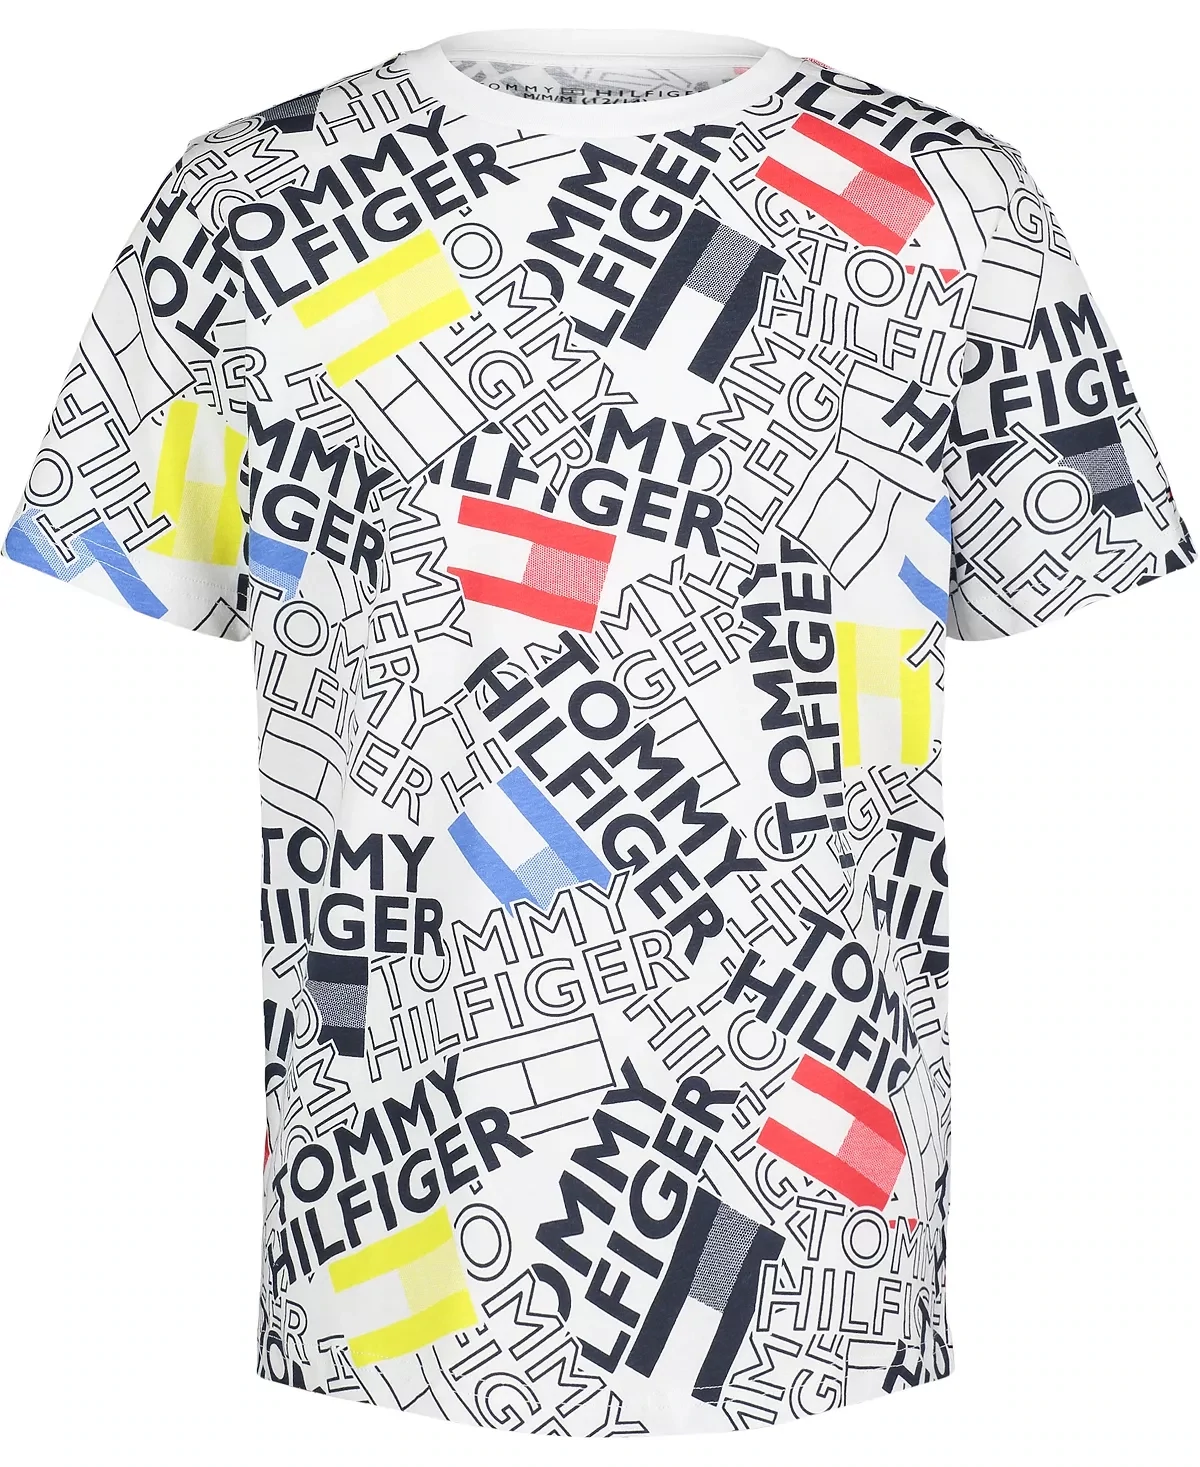 Tommy Hilfiger Toddler Boys Tossed Print T-shirt - Bright White - Size 3T